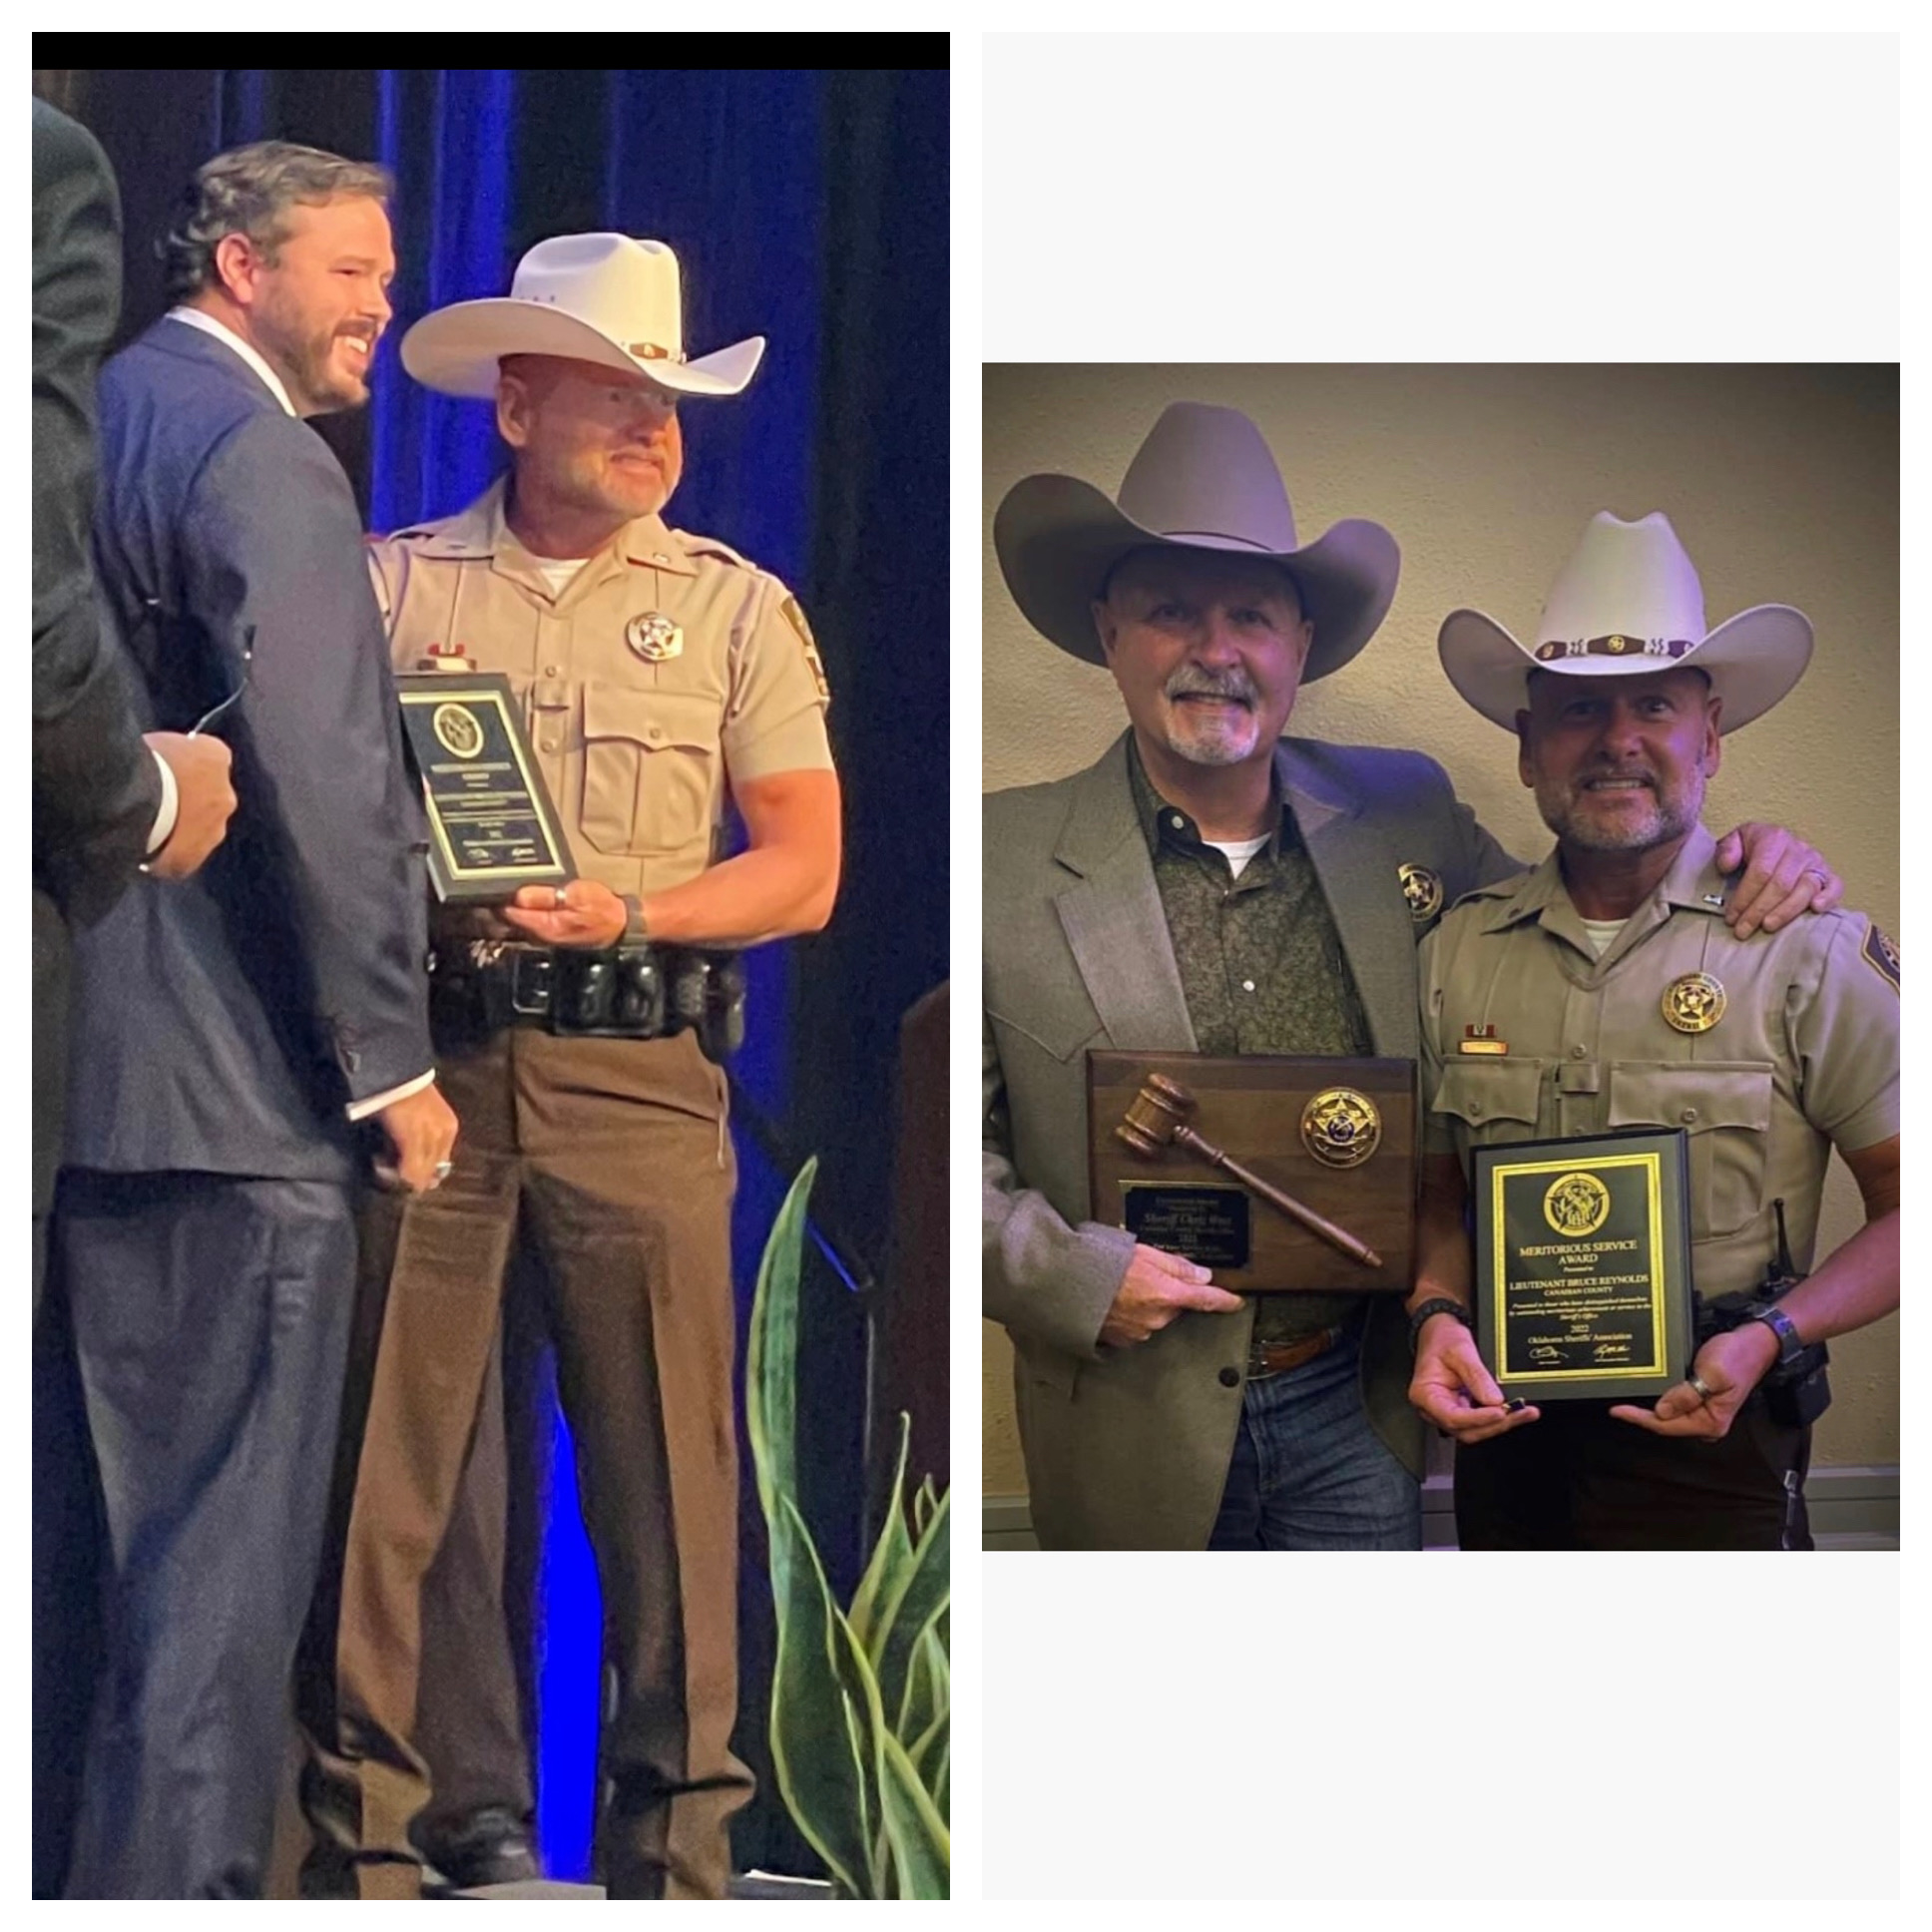 Sheriff’s Deputies receive honors at Oklahoma Sheriff’s Awards banquet.